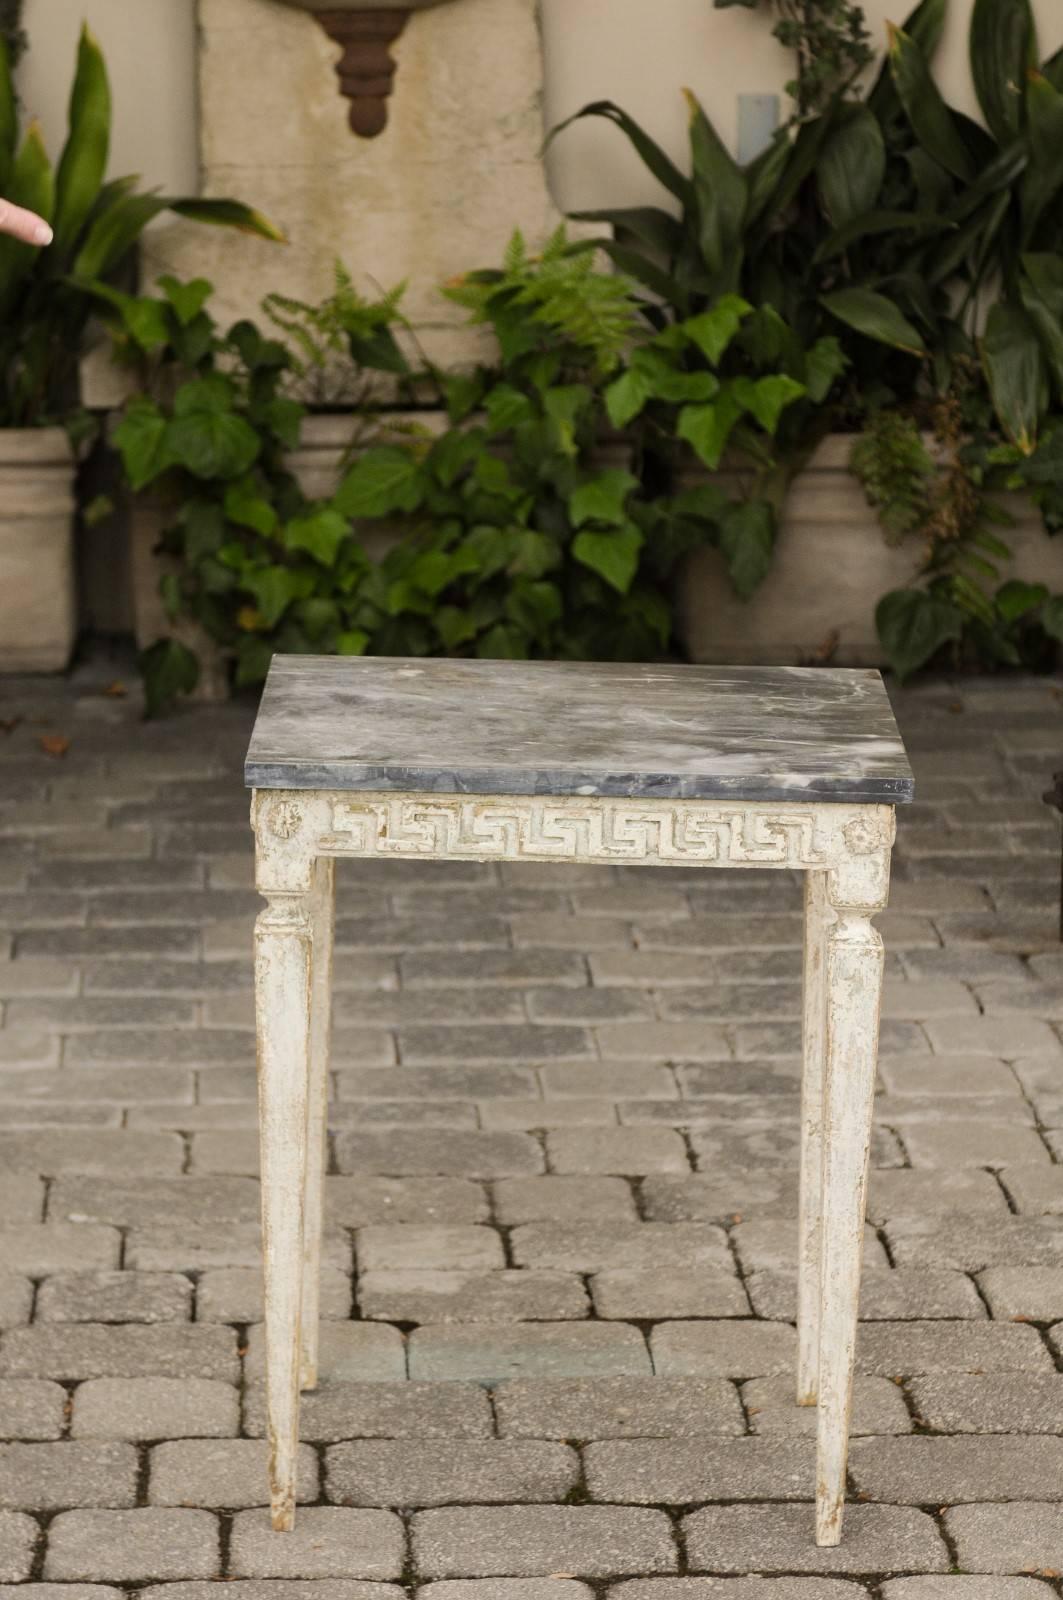 An Italian neoclassical style painted wood side table from the early 20th century, with veined marble top and Greek key frieze. This Italian neoclassical table features a rectangular dark veined marble top sitting above an exquisite apron carved